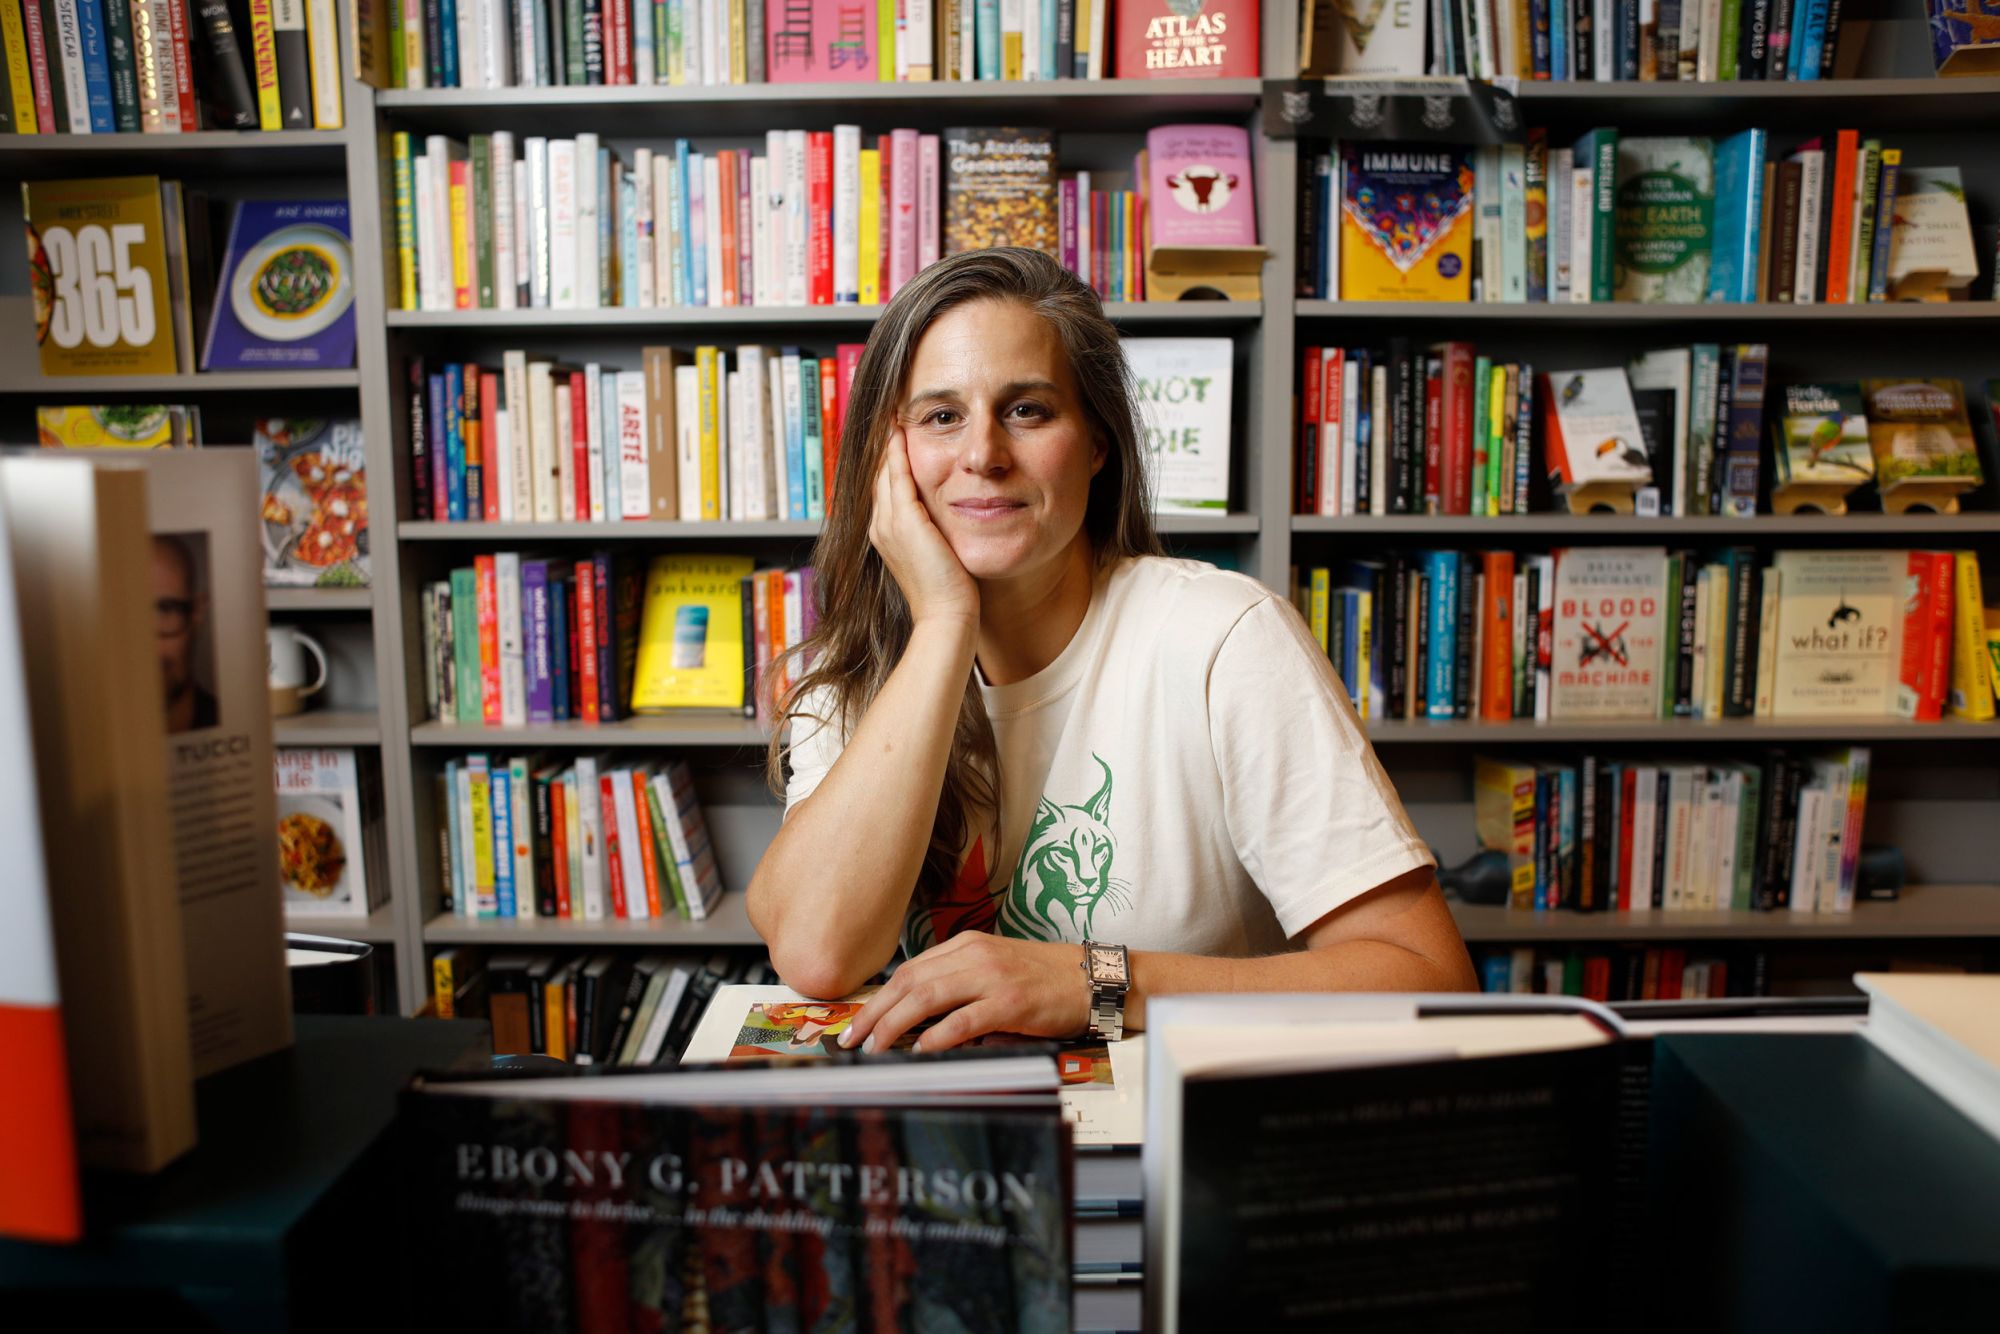 Lauren Groff, a best-selling author and acclaimed novelist, poses in her bookstore, The Lynx, an indie bookstore poised to fight Florida's thousands of book bans.